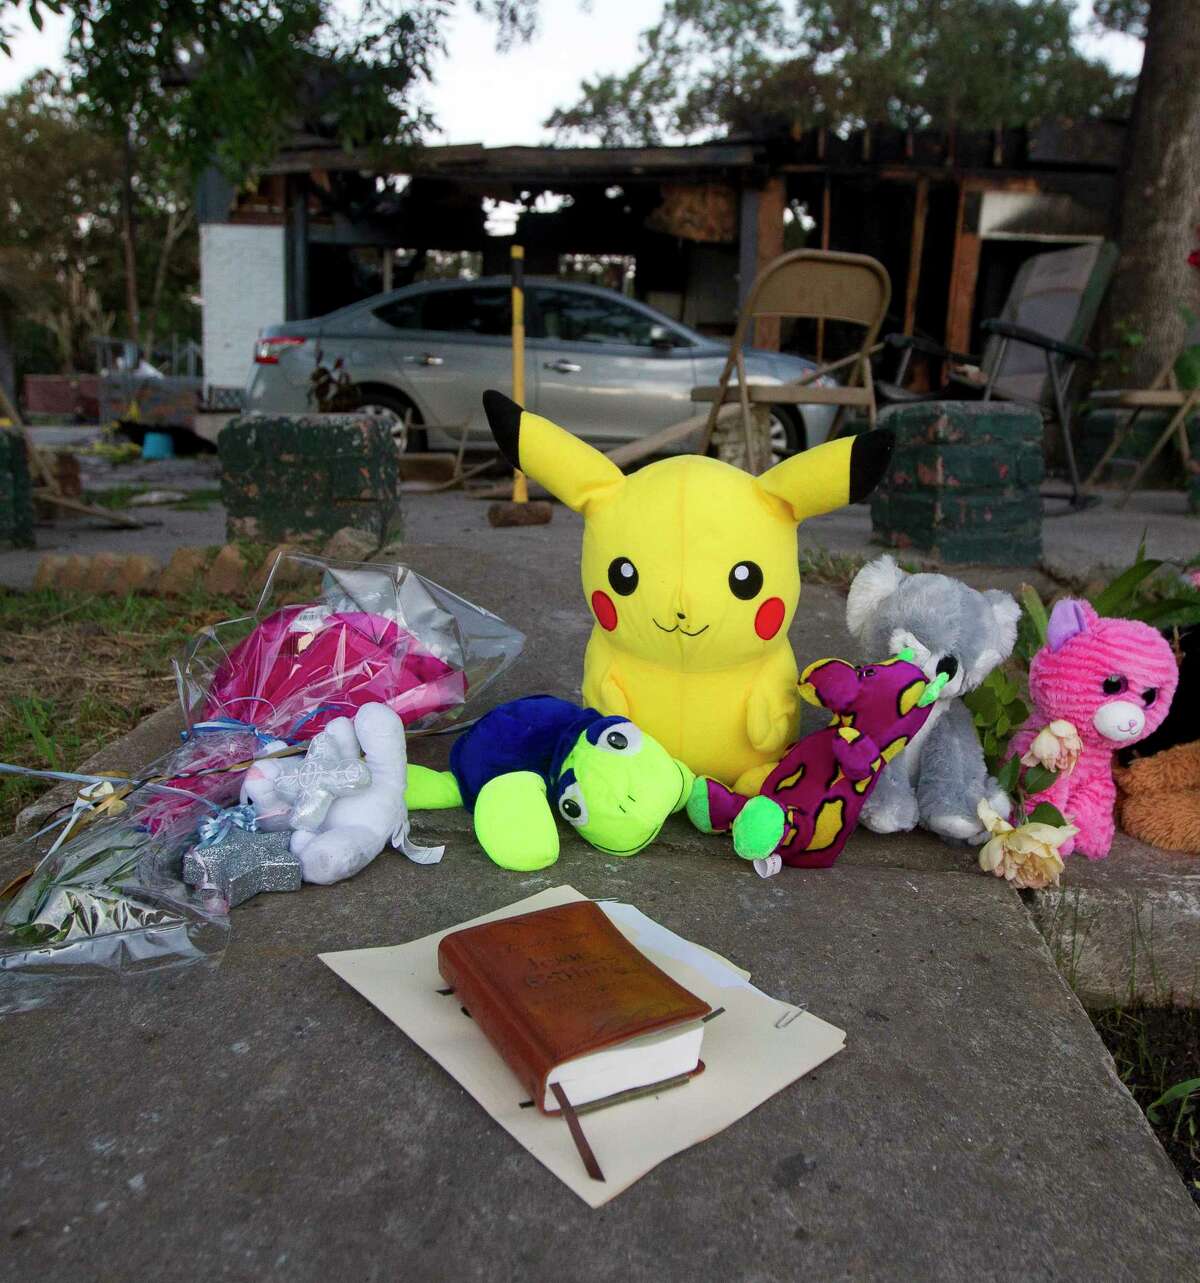 A make-shift memorial is seen in front of the home where a two-story house fire Friday morning killed three children on Johnson Road, Saturday, May 13, 2017, in the community of Tamina, just east of The Woodlands.